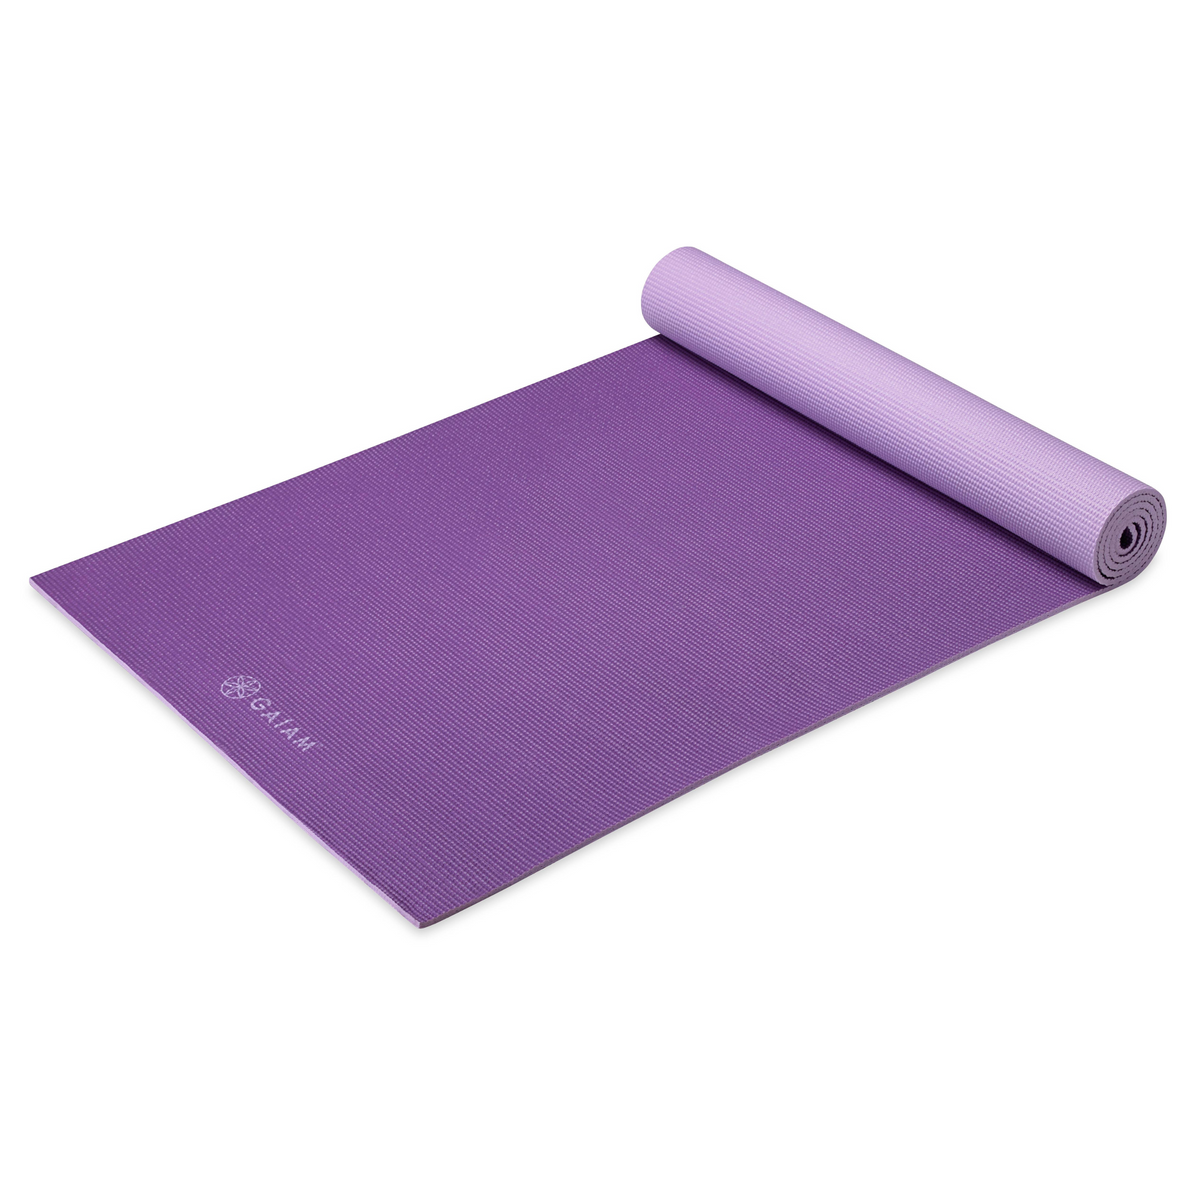 Side view of Premium 2-Color Yoga Mats (6mm)